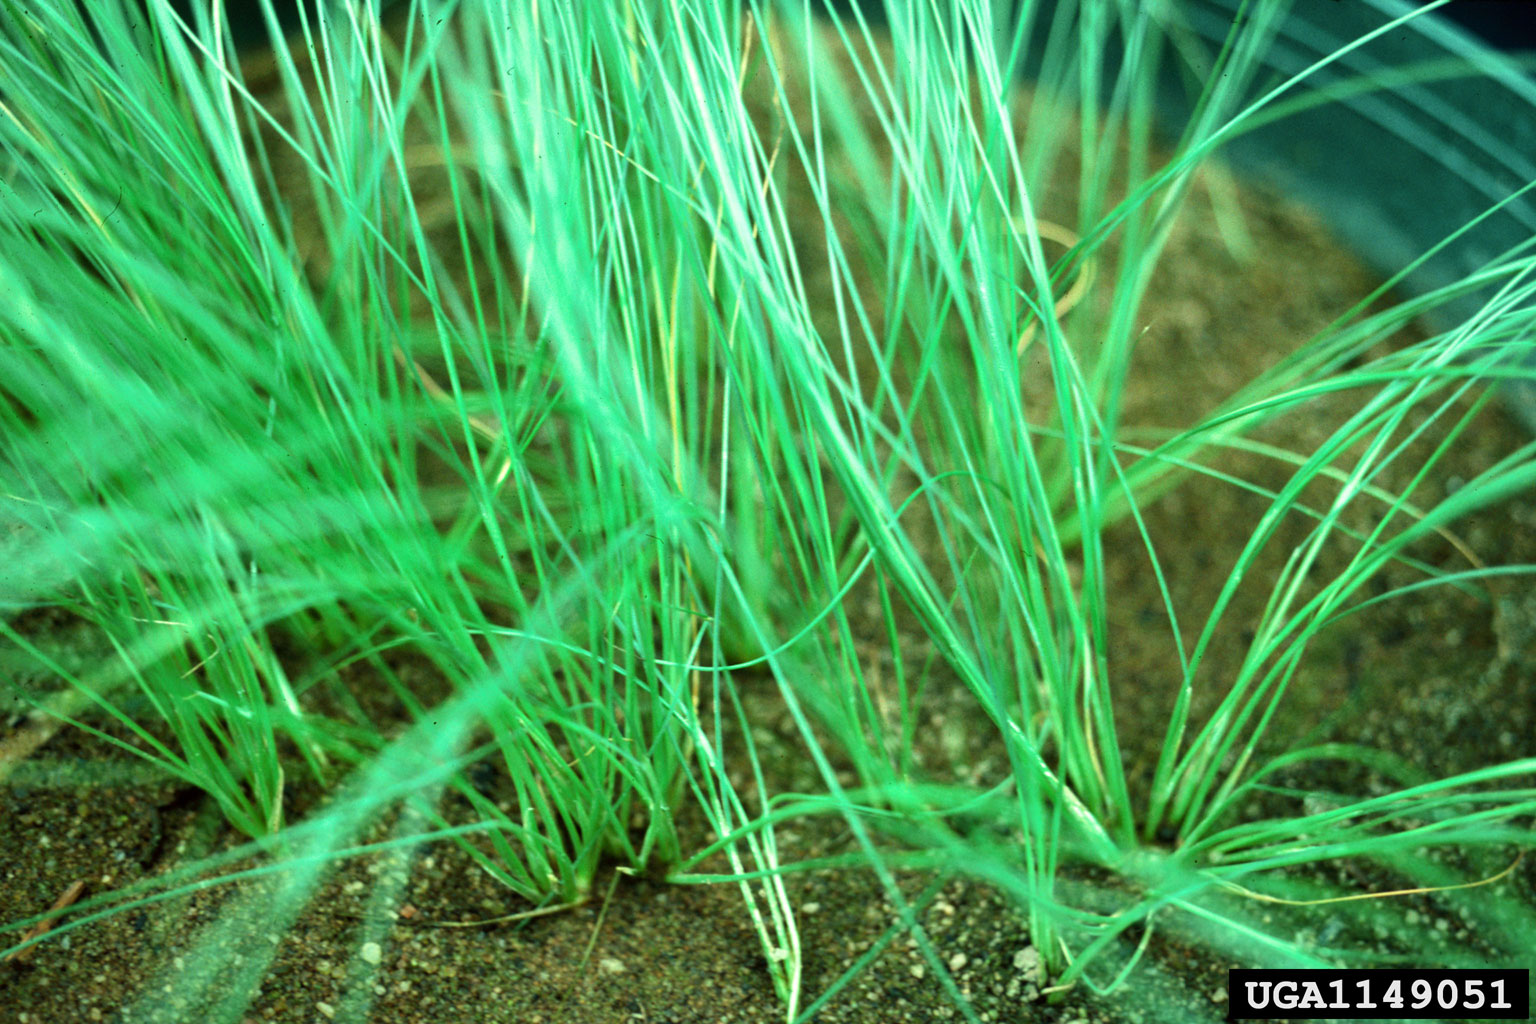 Photograph of serrated tussock, a type of grass. The photo is a close up of thin green grass blades growing from the soil in a pot. The edge of the pot can be seen in the upper right part of the image.